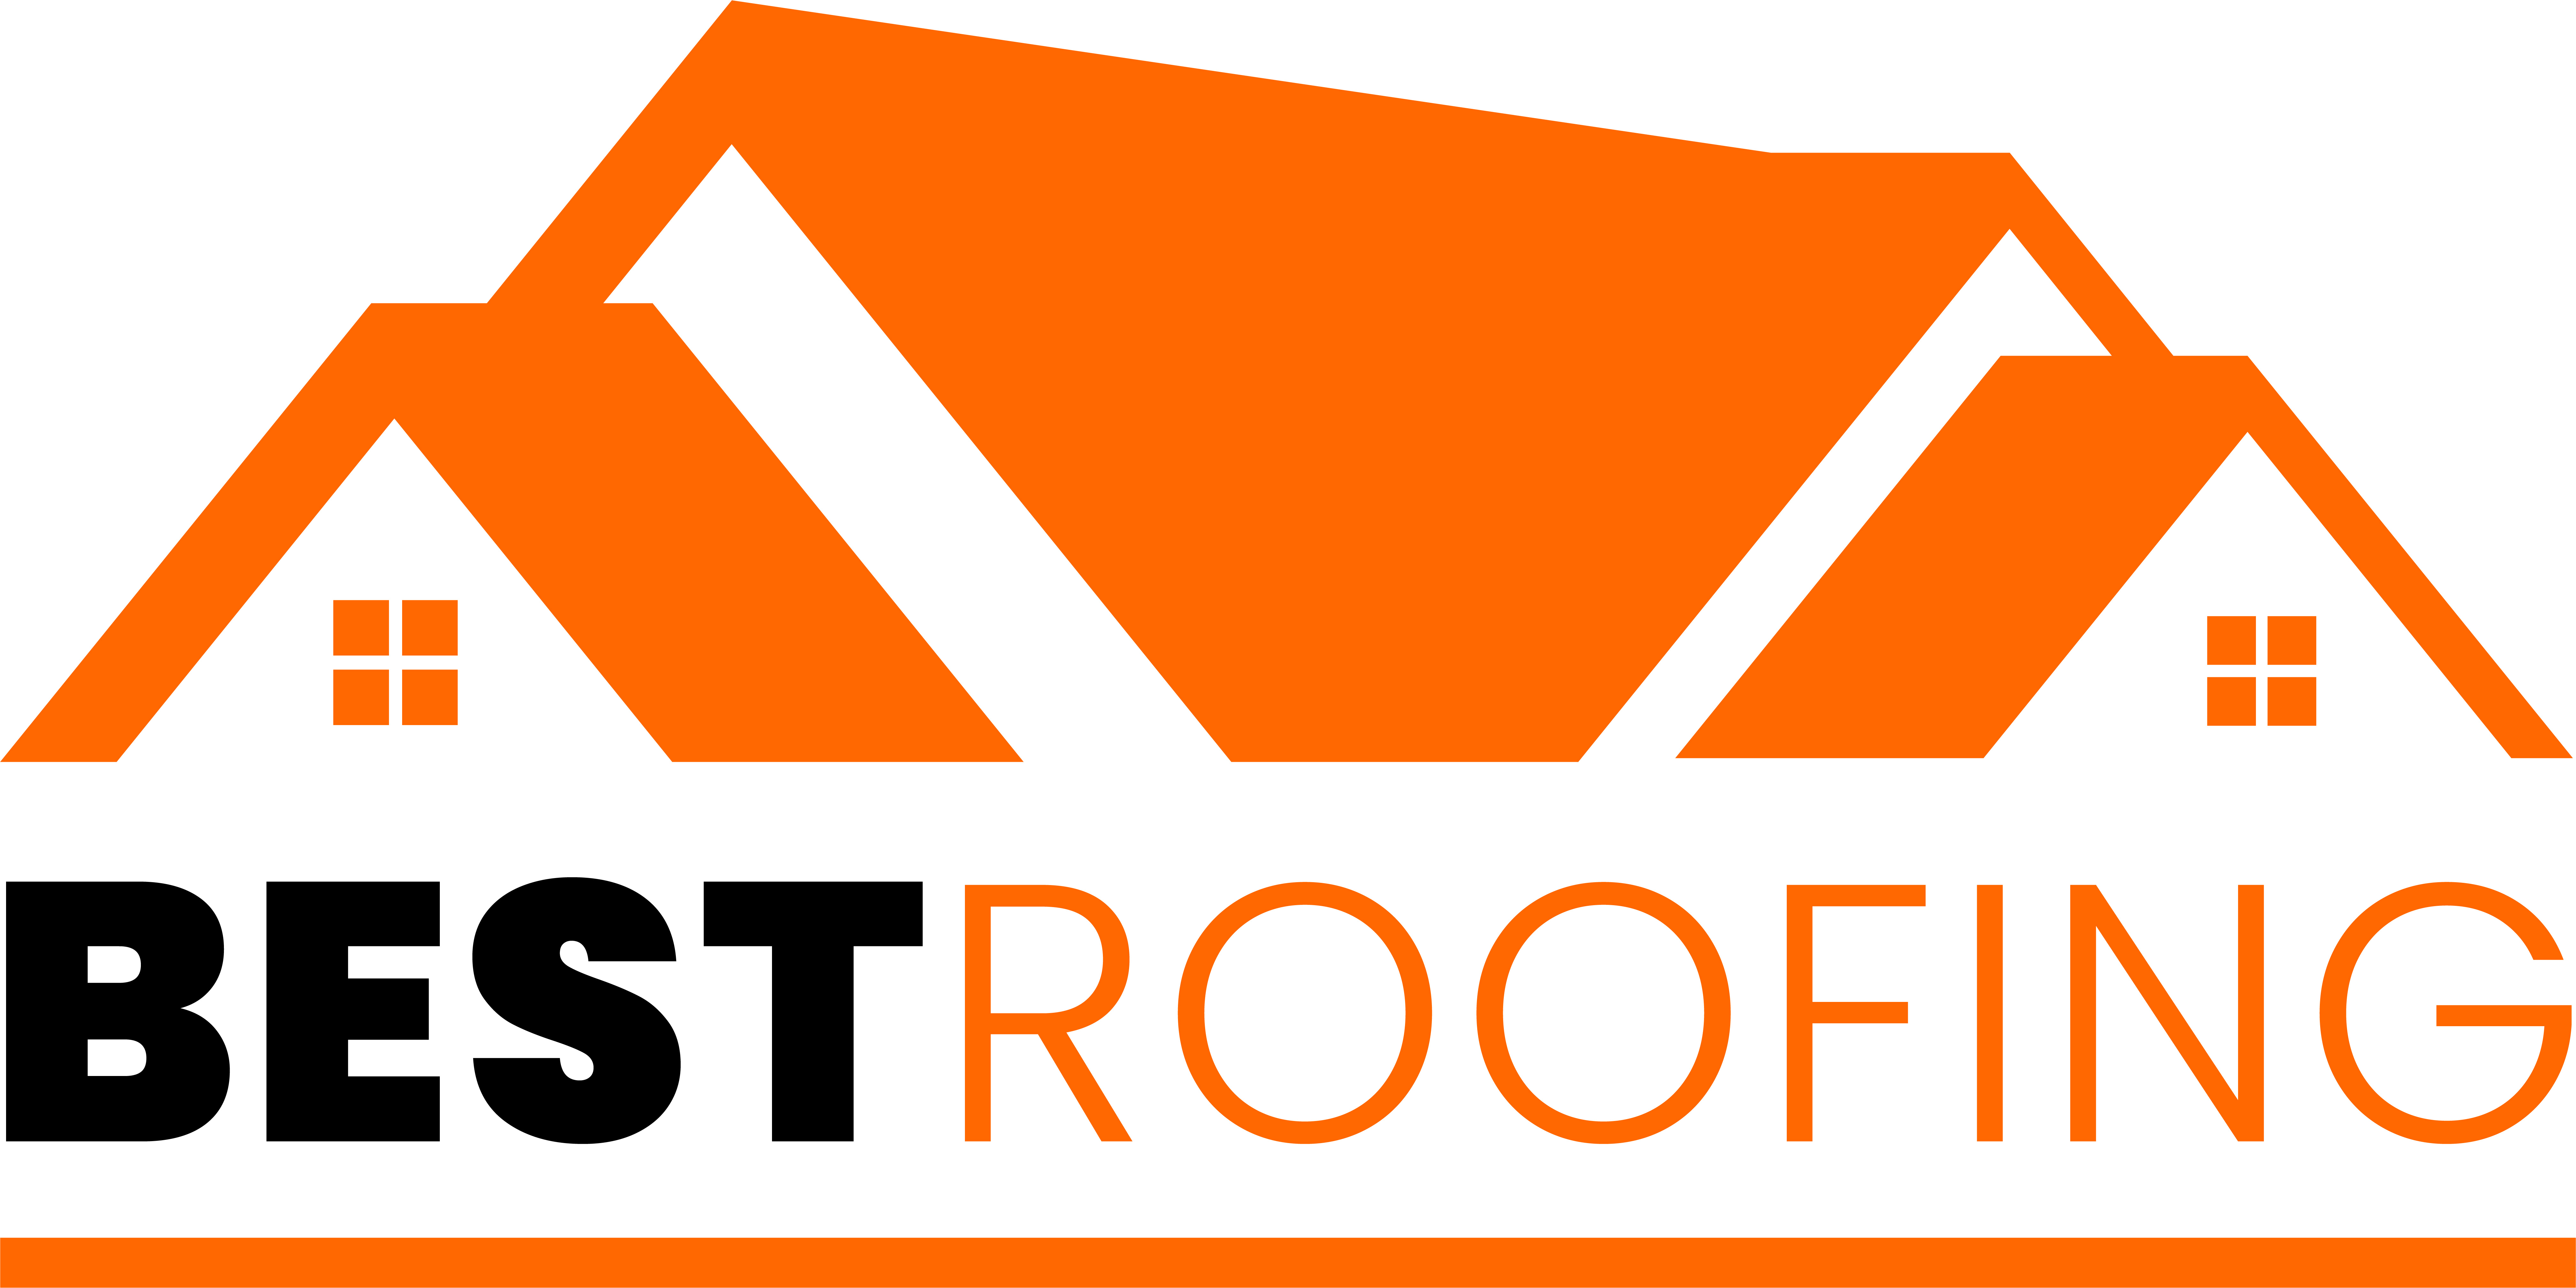 Best Roofing Announces Special Discounts For First-Time Customers In Los Angeles County